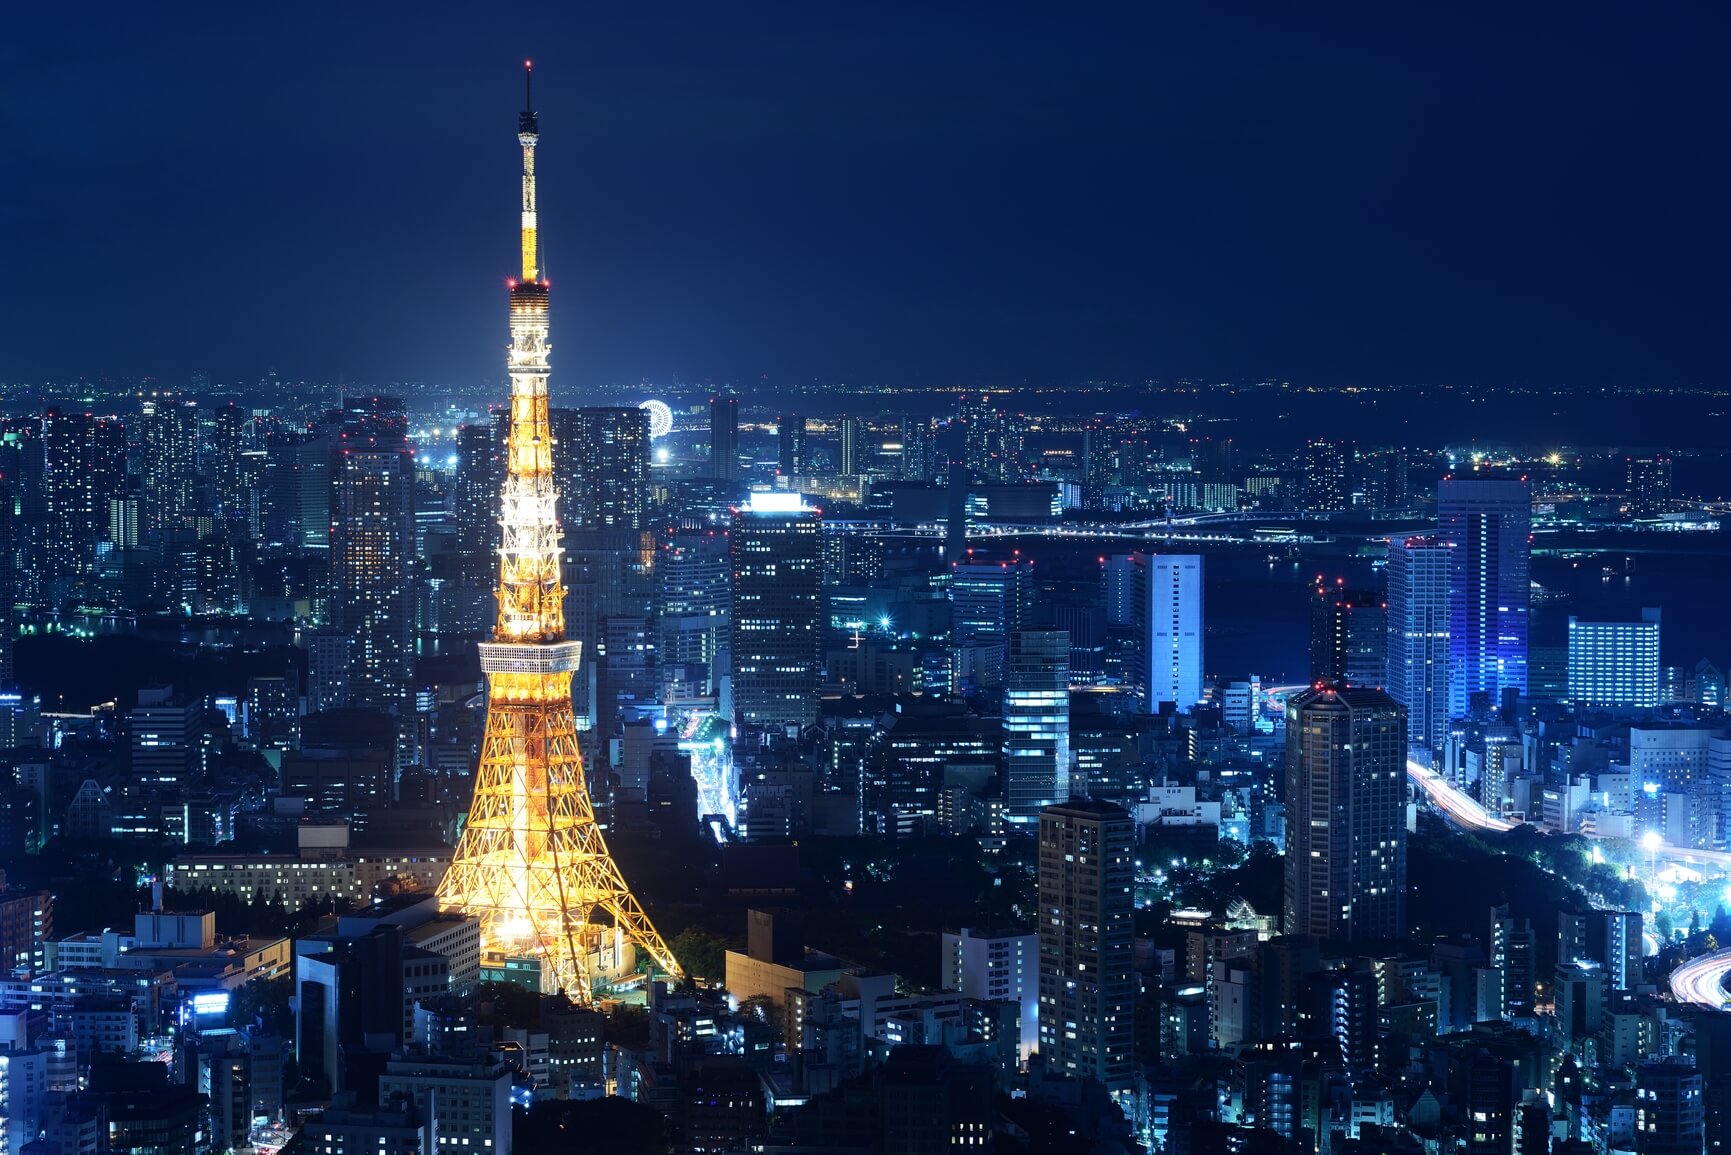 <div class='expired'>EXPIRED</div>Non-stop from Melbourne or Sydney, Australia to Tokyo, Japan from only $618 AUD roundtrip | Secret Flying